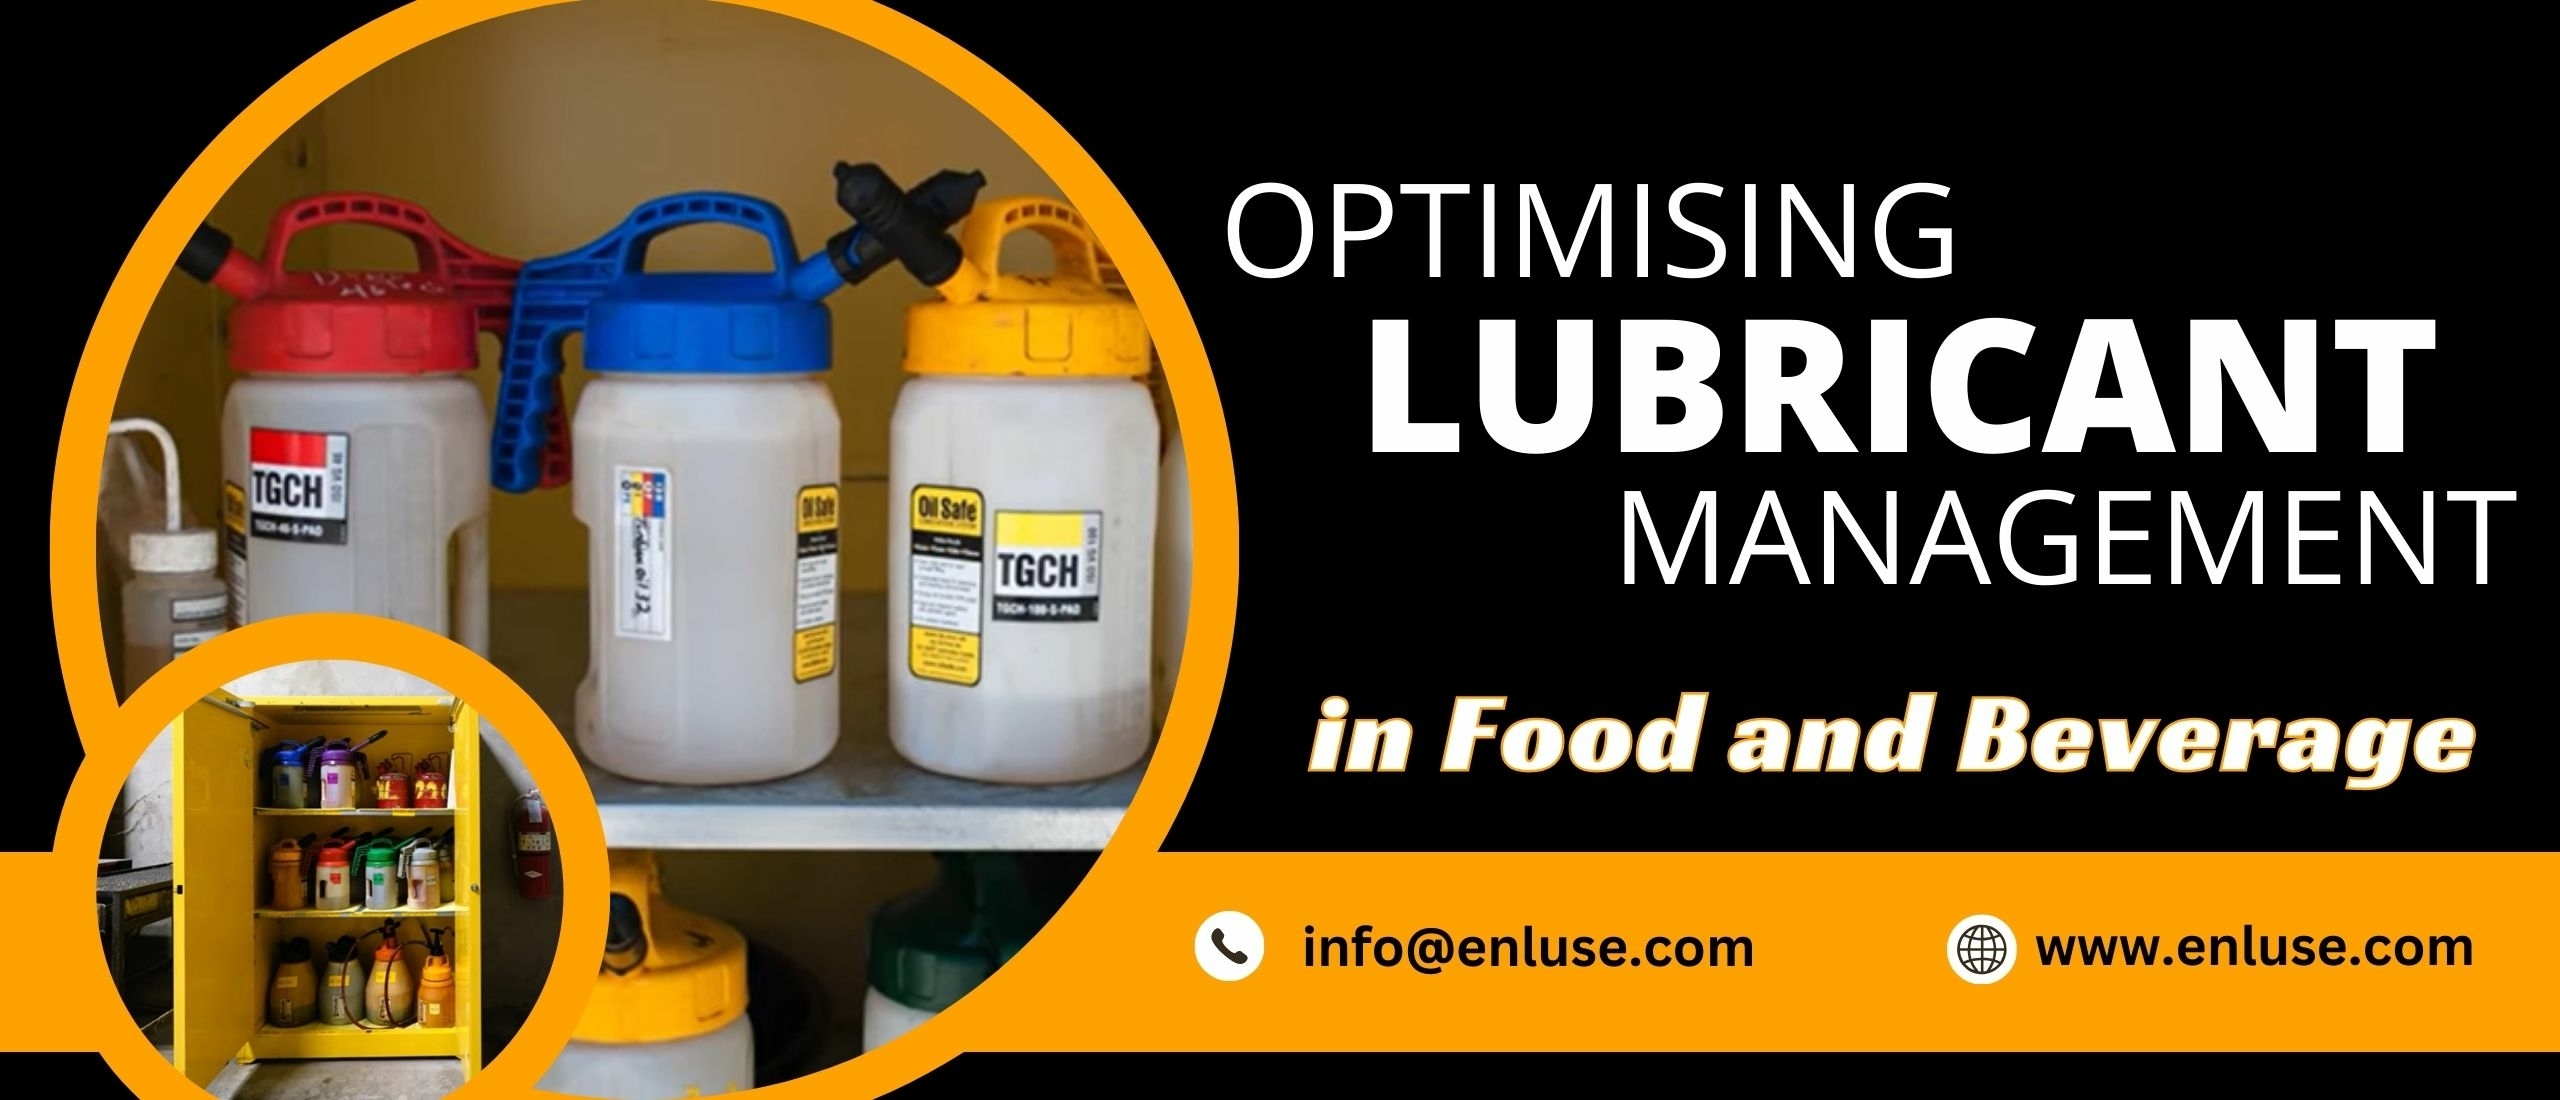 Optimising Lubricant Management in Food and Beverage